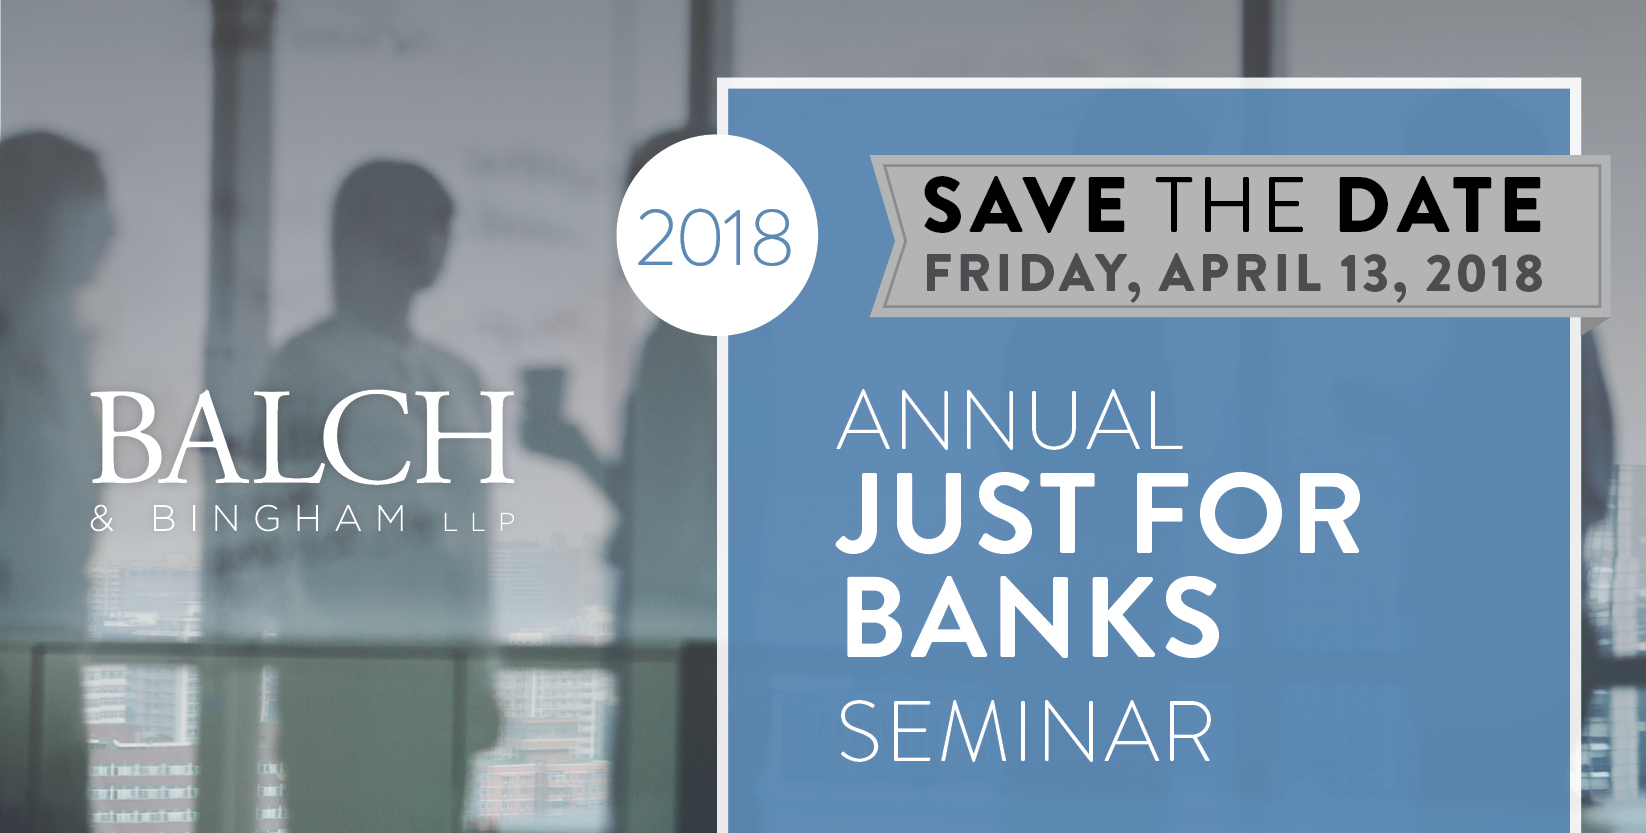 Just For Banks Save the Date 2018